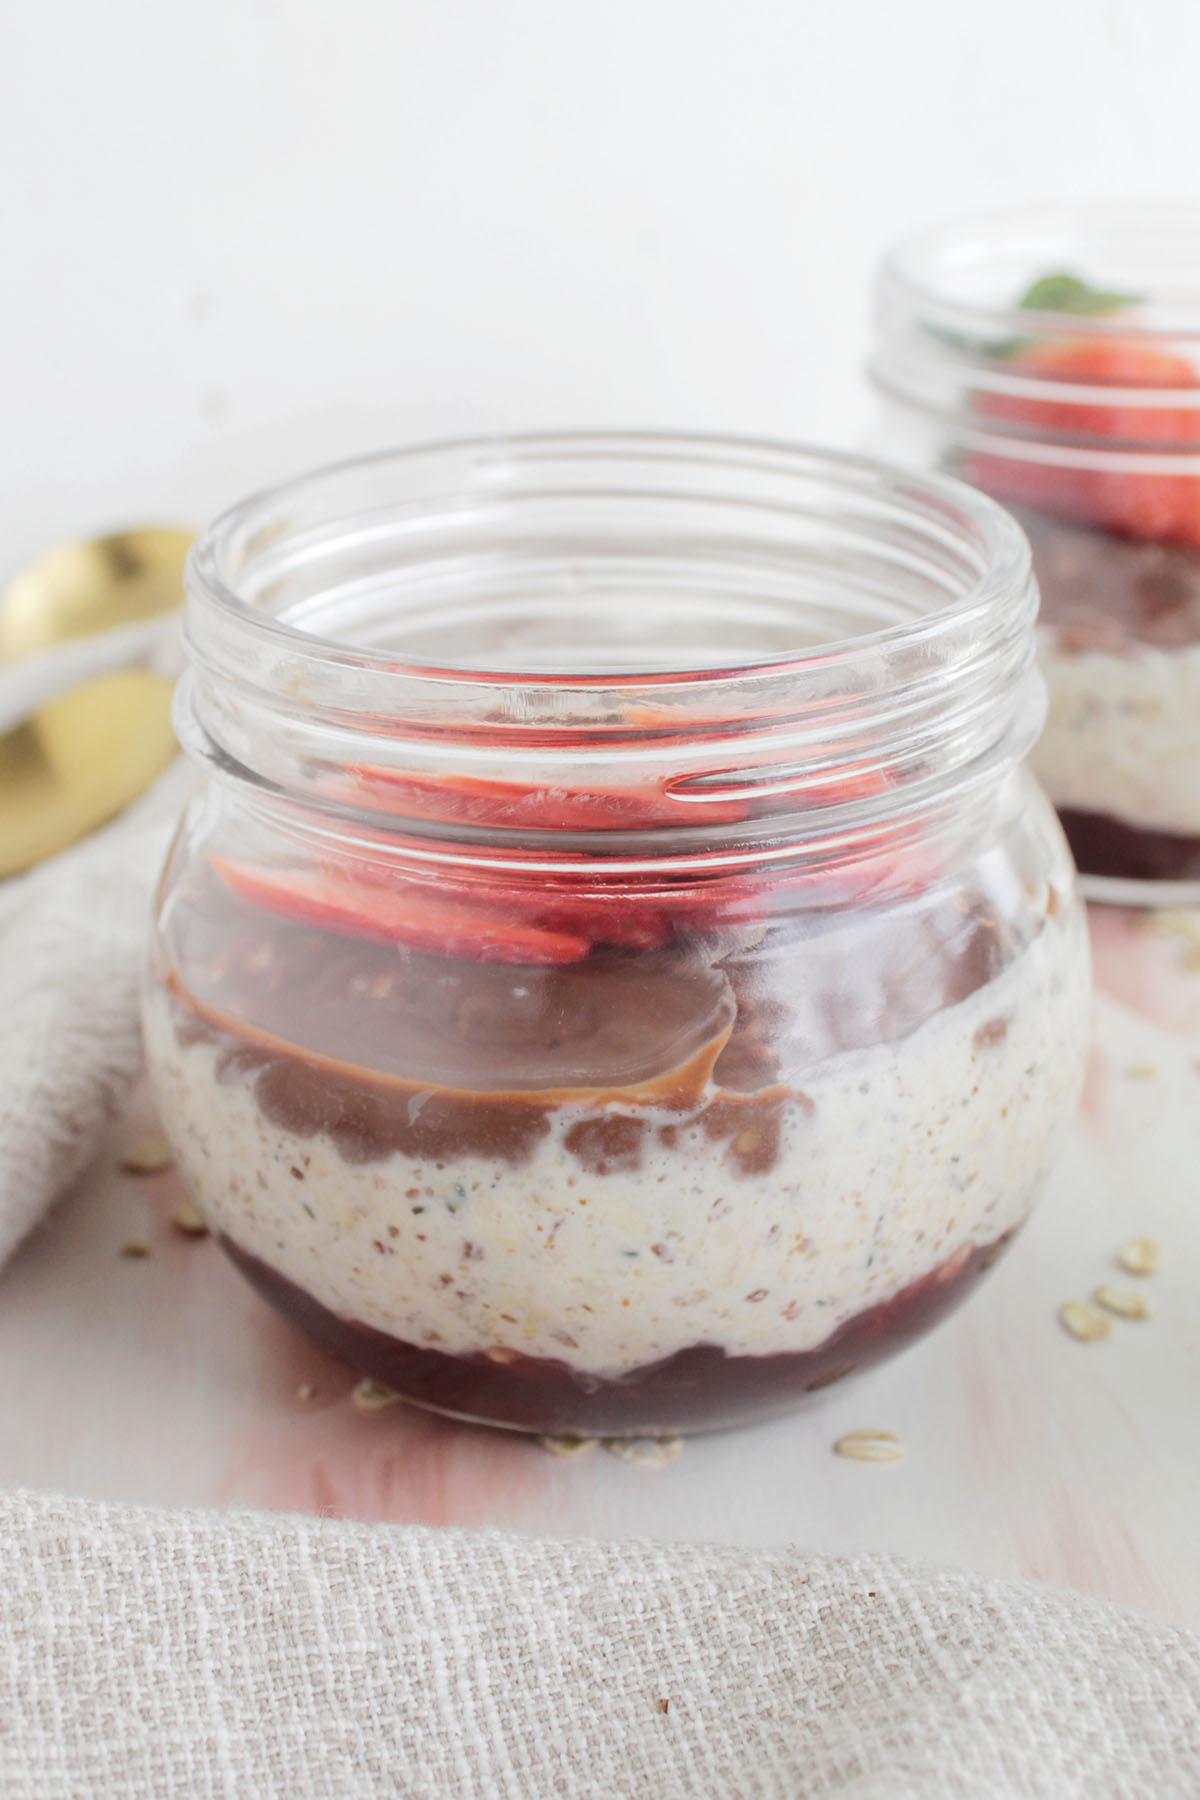 A container of overnight oats with chocolate and topped with fresh strawberries.